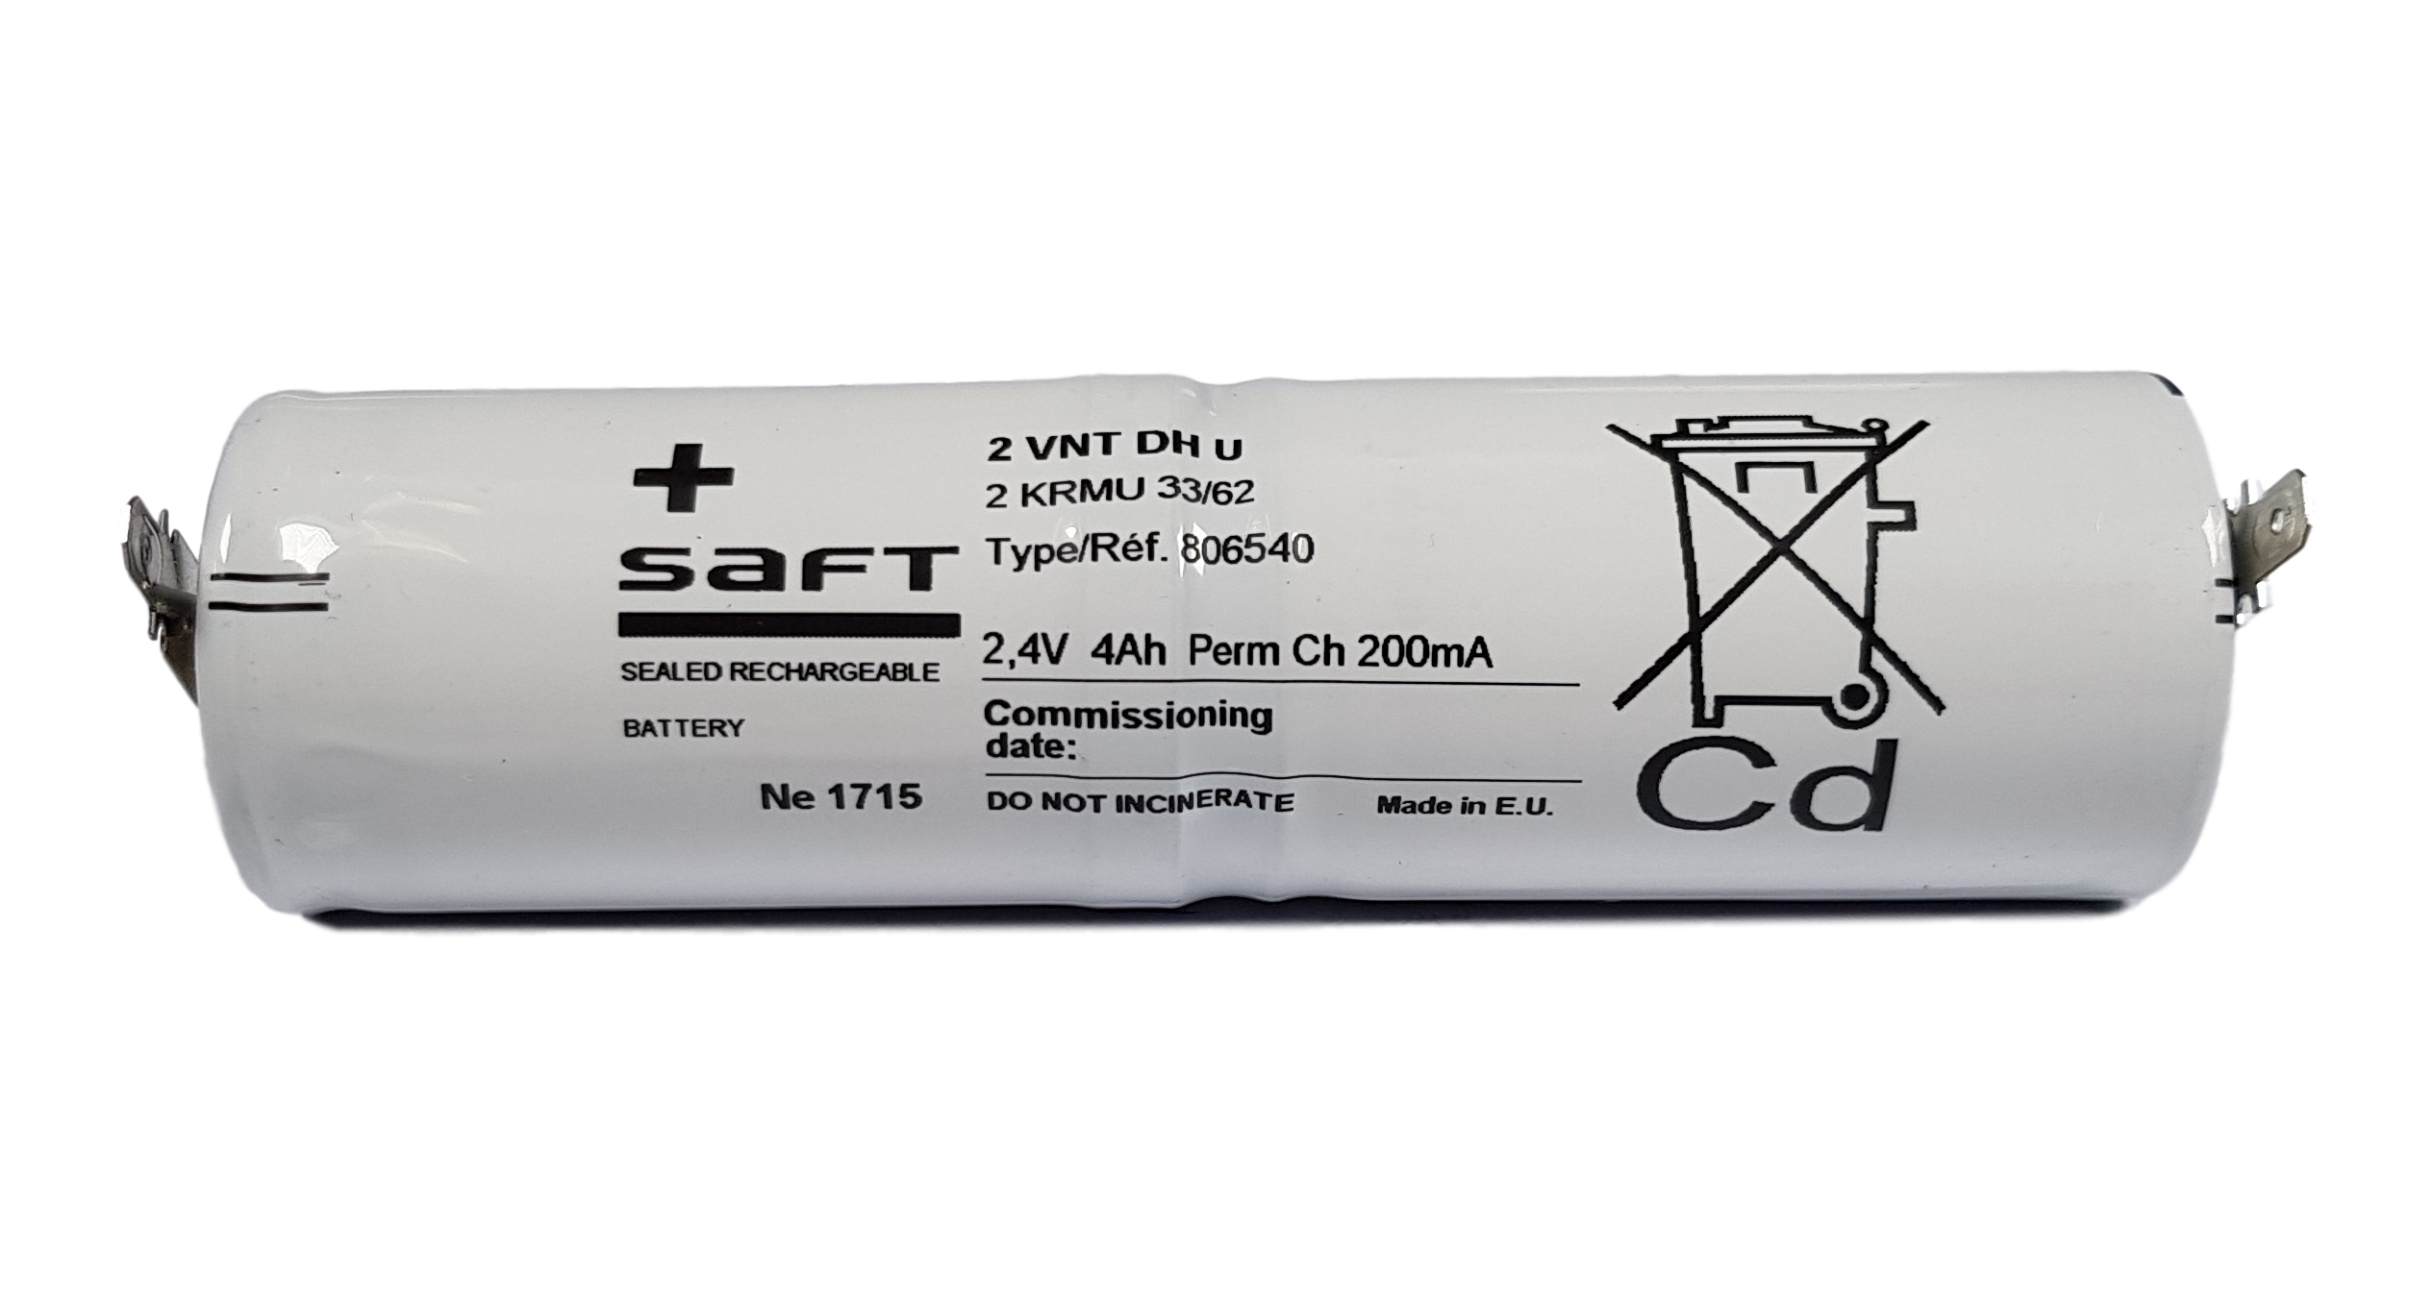 Noodverlichting accu Saft/Arts NiCd 2,4V 4000mAh D 2STAAF - Faston 4,8mm